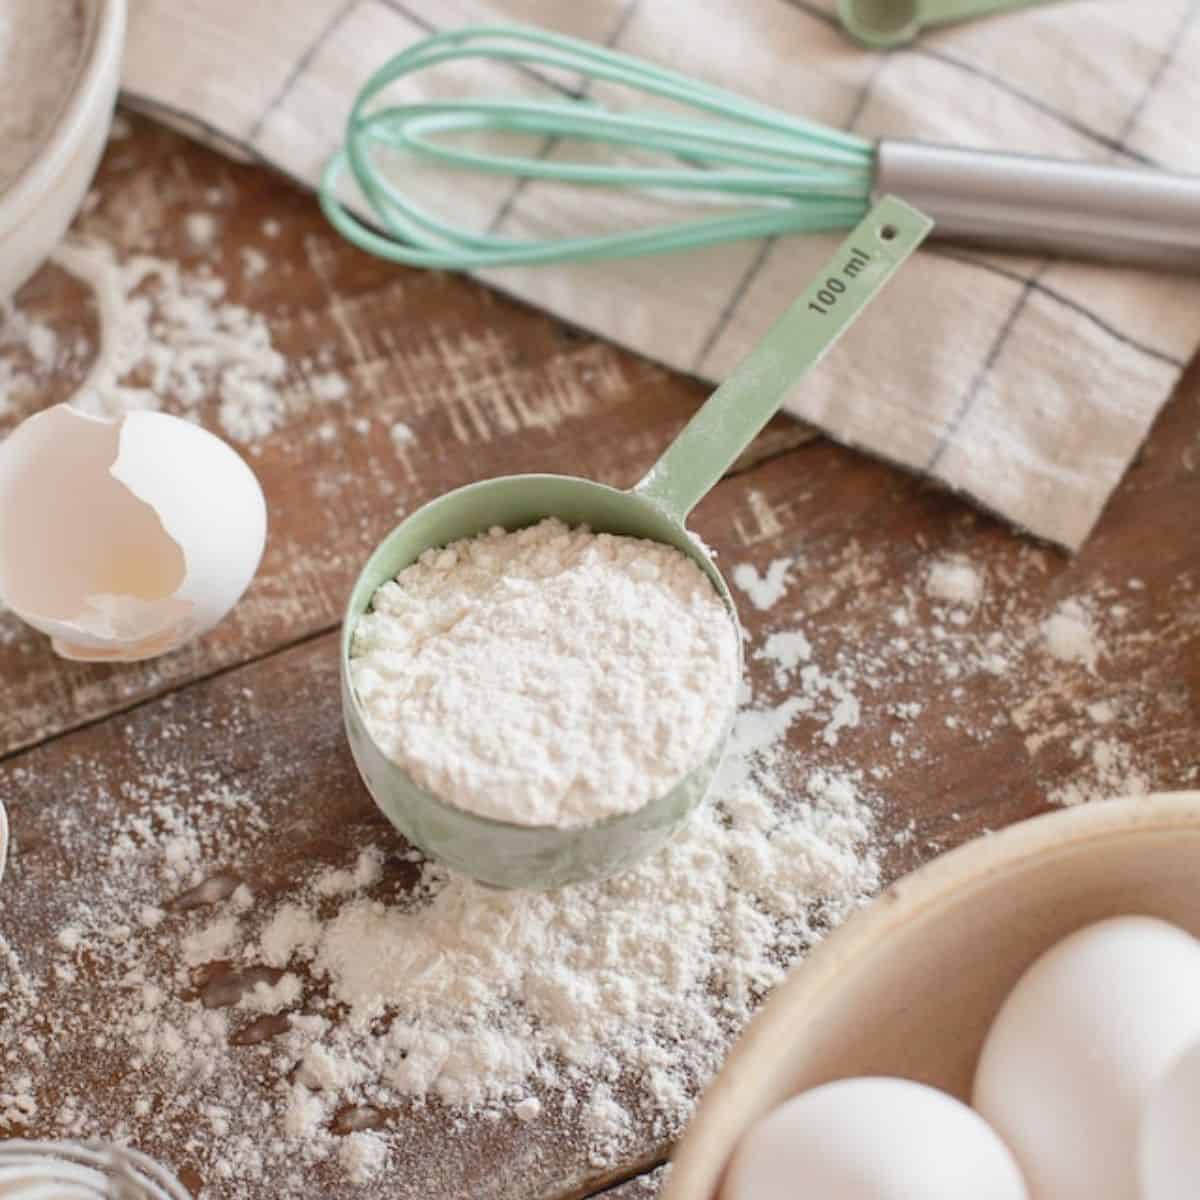 White powder in a measuring cup with eggs on the side and other kitchen tools